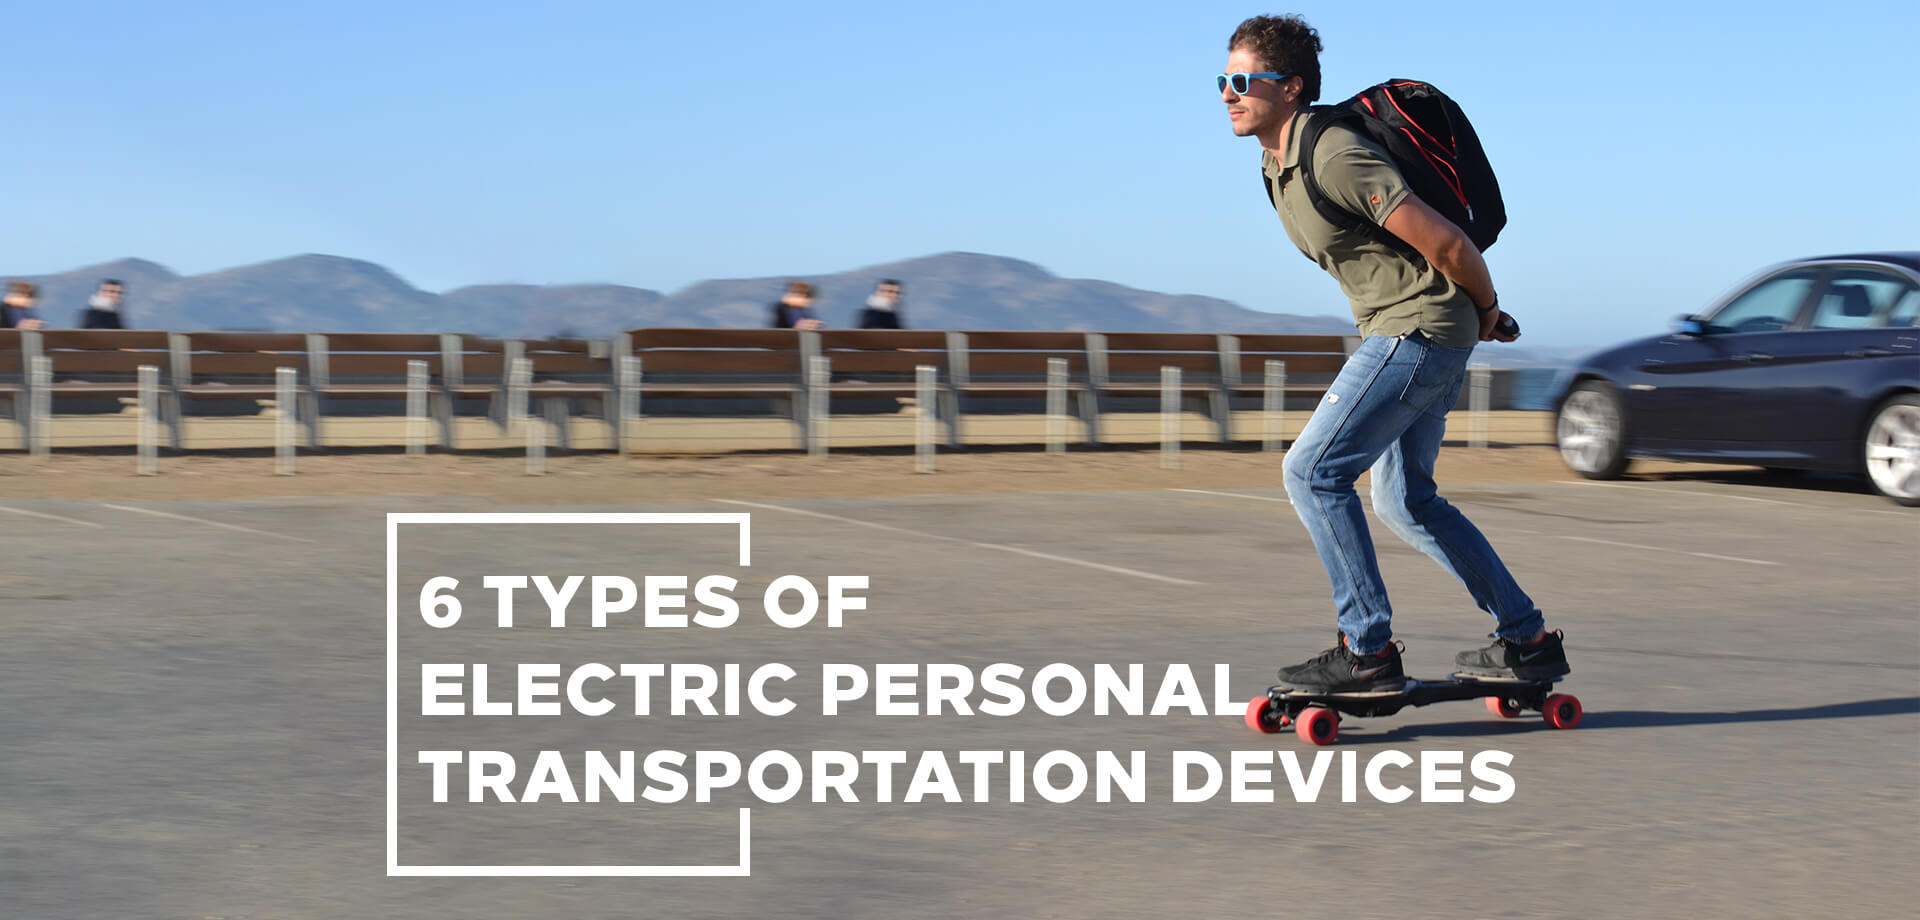 6 types of electric personal transportation devices NeuFutur Magazine